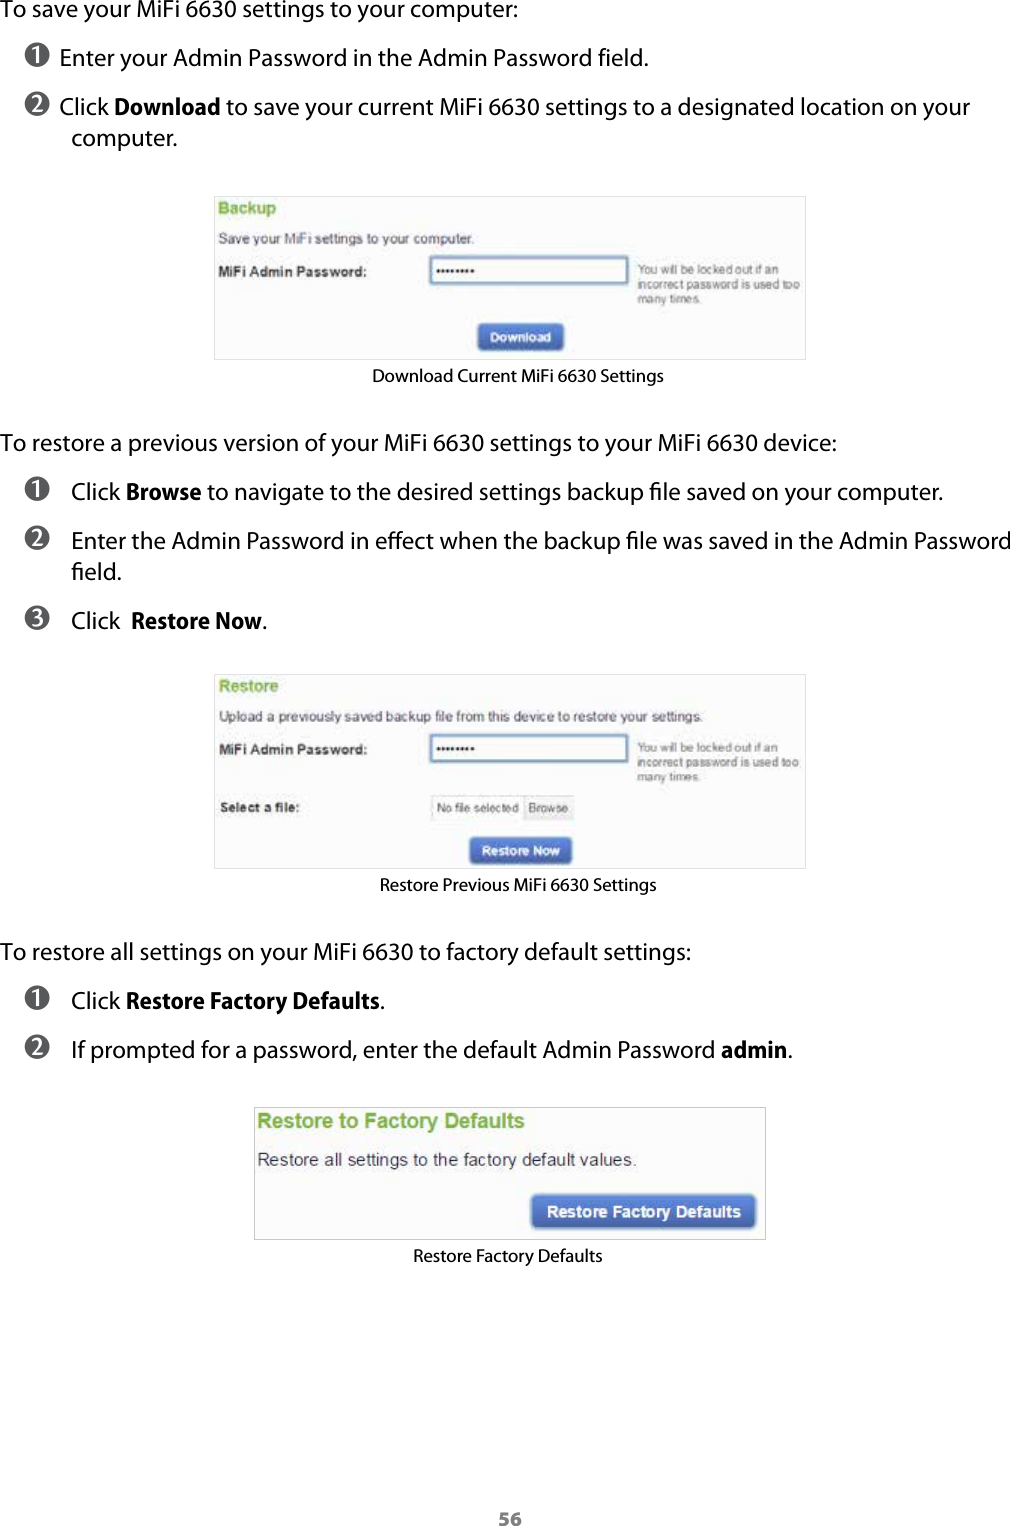 56To save your MiFi 6630 settings to your computer:➊ Enter your Admin Password in the Admin Password field.➋ Click Download to save your current MiFi 6630 settings to a designated location on your computer.Download Current MiFi 6630 SettingsTo restore a previous version of your MiFi 6630 settings to your MiFi 6630 device: ➊ Click Browse to navigate to the desired settings backup le saved on your computer. ➋ Enter the Admin Password in eect when the backup le was saved in the Admin Password eld. ➌ Click  Restore Now.Restore Previous MiFi 6630 SettingsTo restore all settings on your MiFi 6630 to factory default settings: ➊ Click Restore Factory Defaults. ➋ If prompted for a password, enter the default Admin Password admin.Restore Factory Defaults